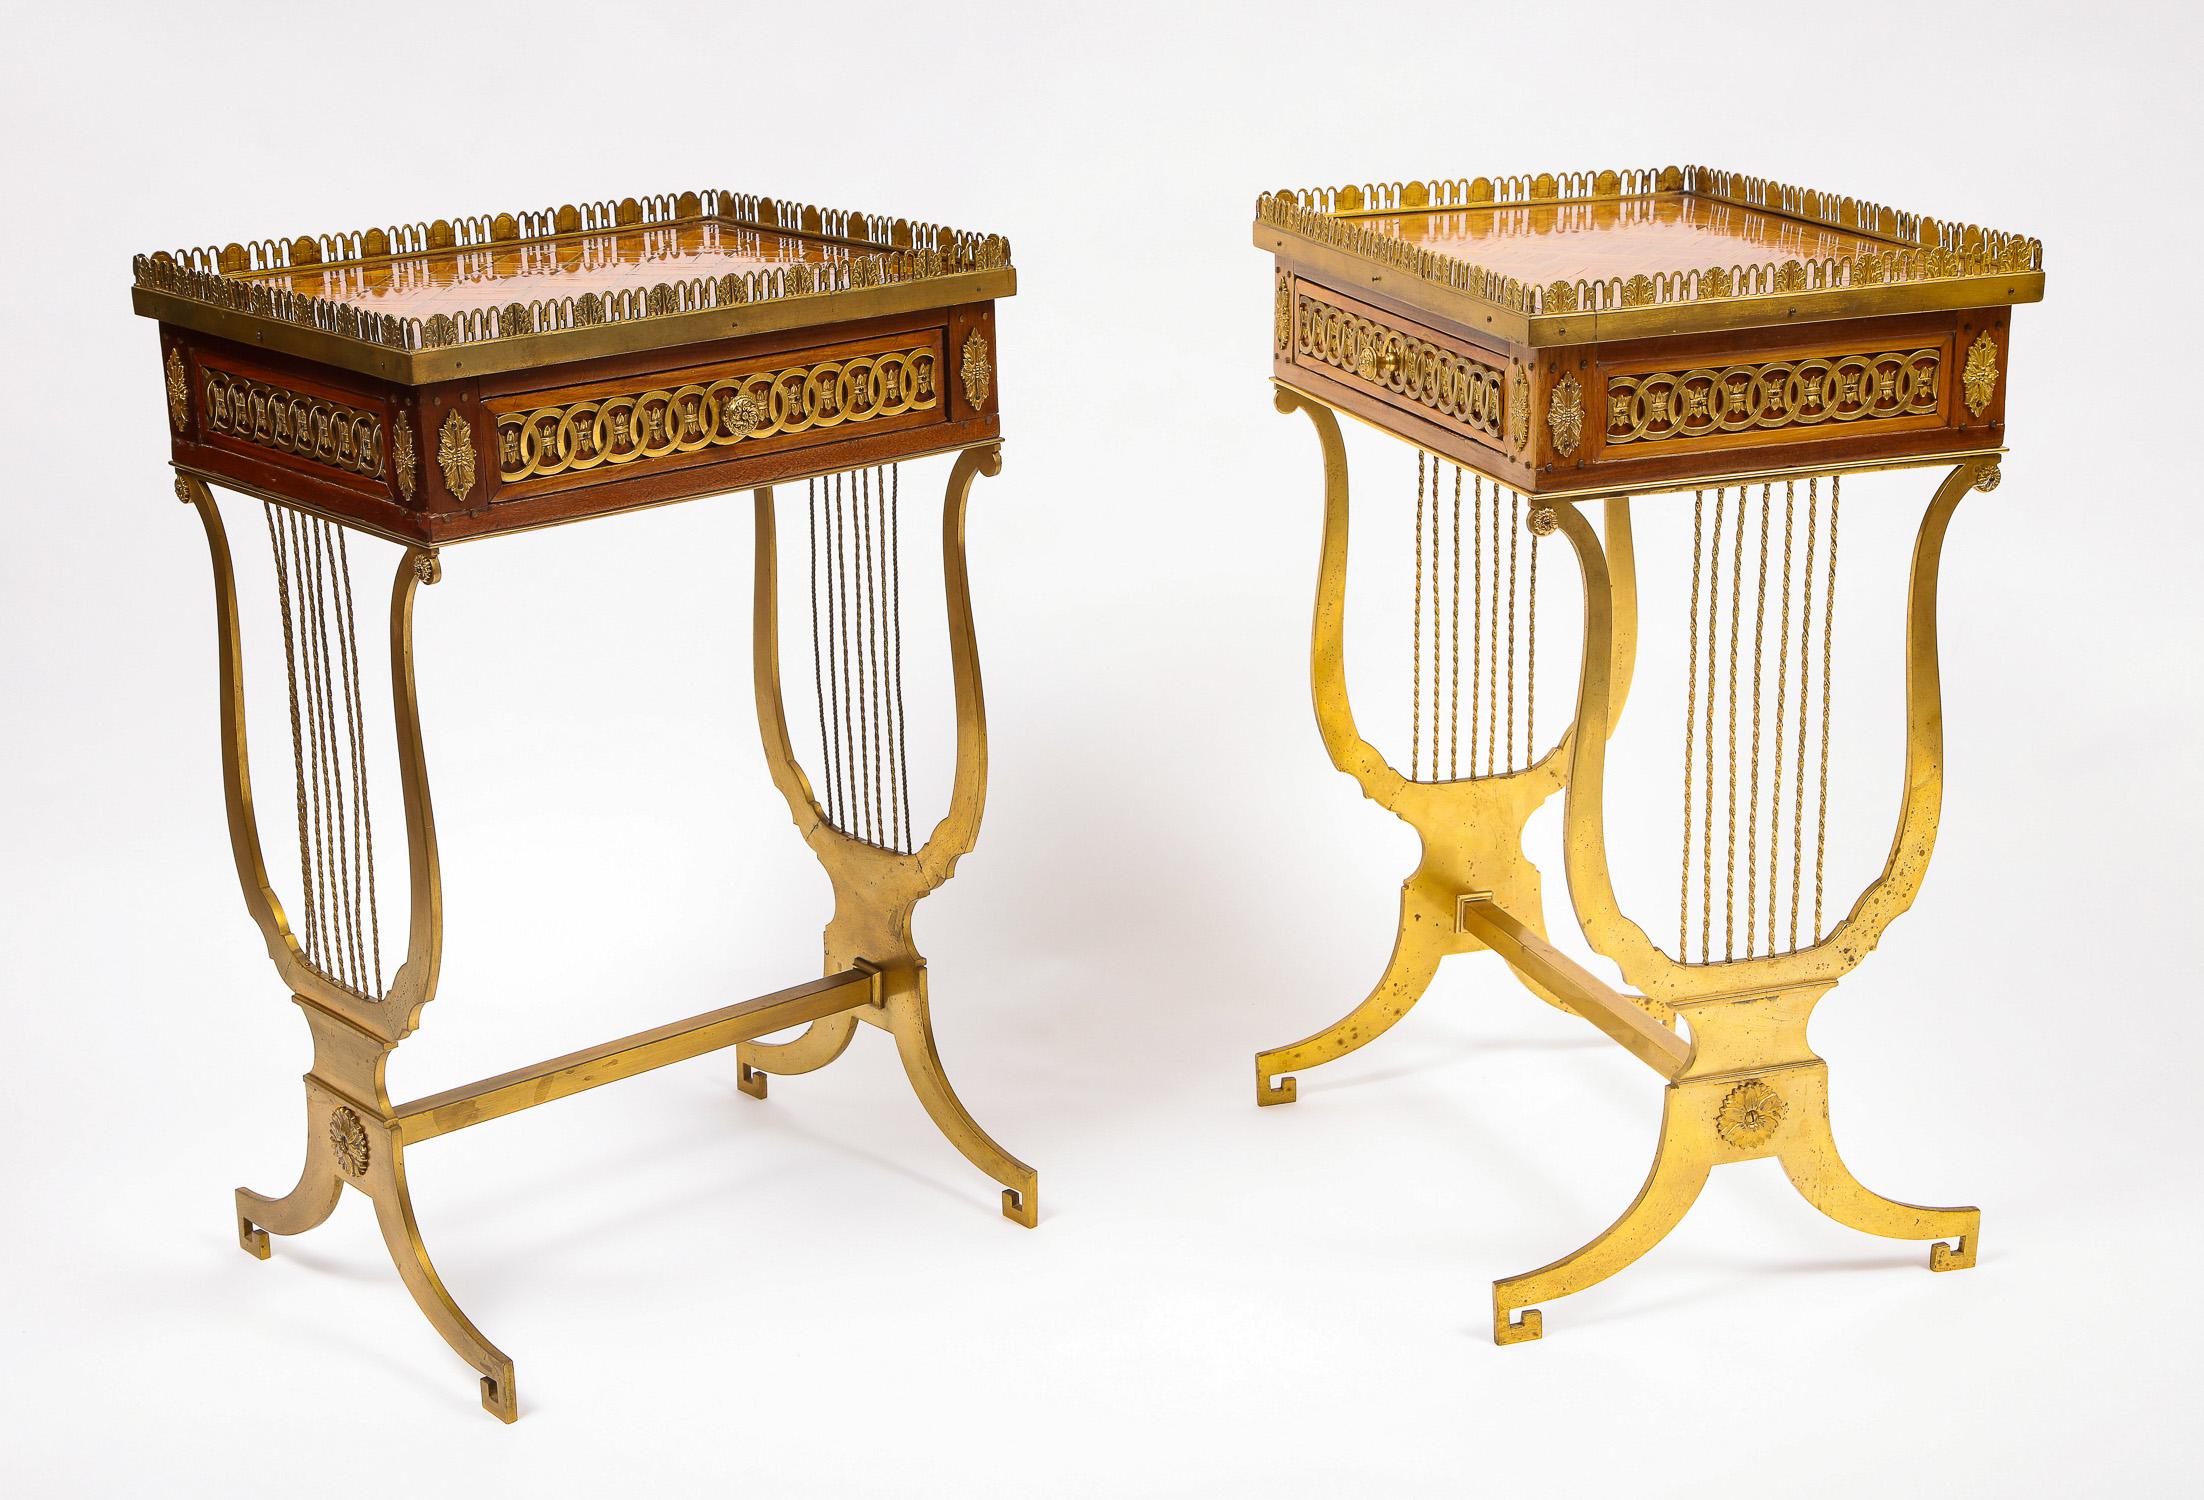 A magnificent pair of antique French Louis XVI style rectangular shaped side tables/centre tables with bronze lyre shaped legs. Beautifully hand-chased doré bronze can be found throughout the tables, including around the top and sides, on the